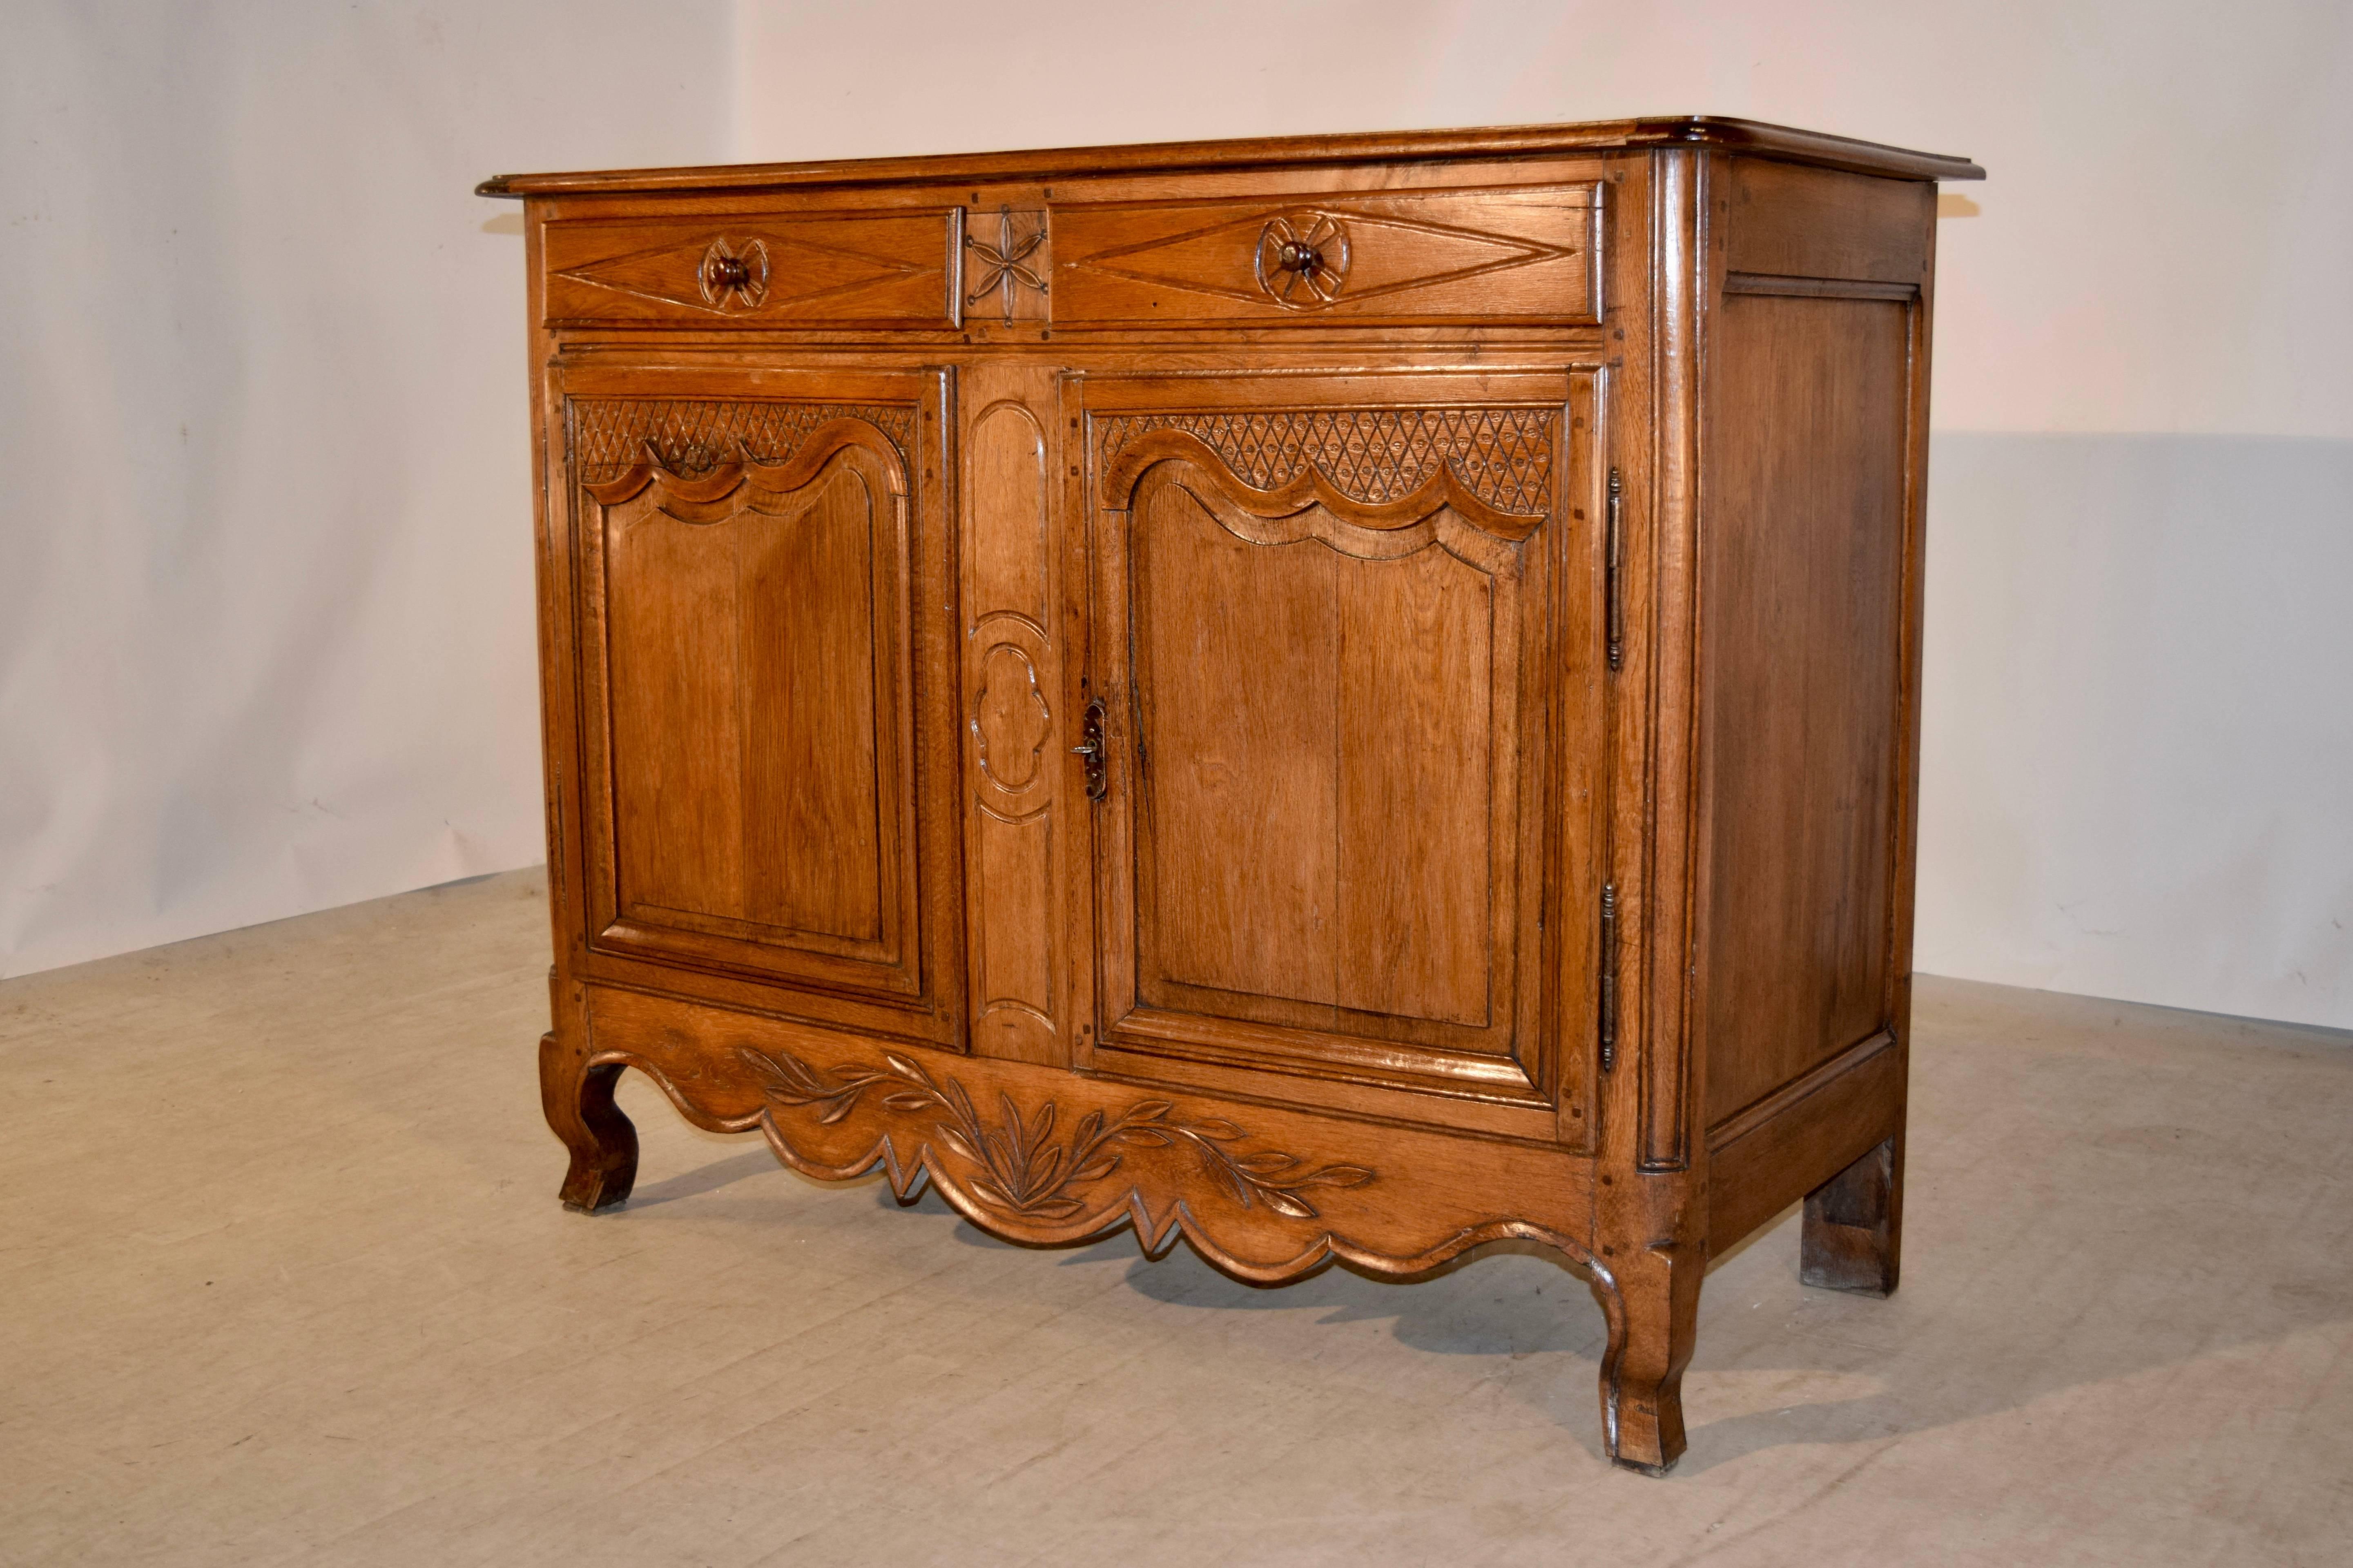 19th century French buffet made from oak. The top is made of three planks and is banded on the ends to keep shrinkage at bay. There is a beveled edge and rounded corners as well. The sides are paneled and the front contains two drawers which have